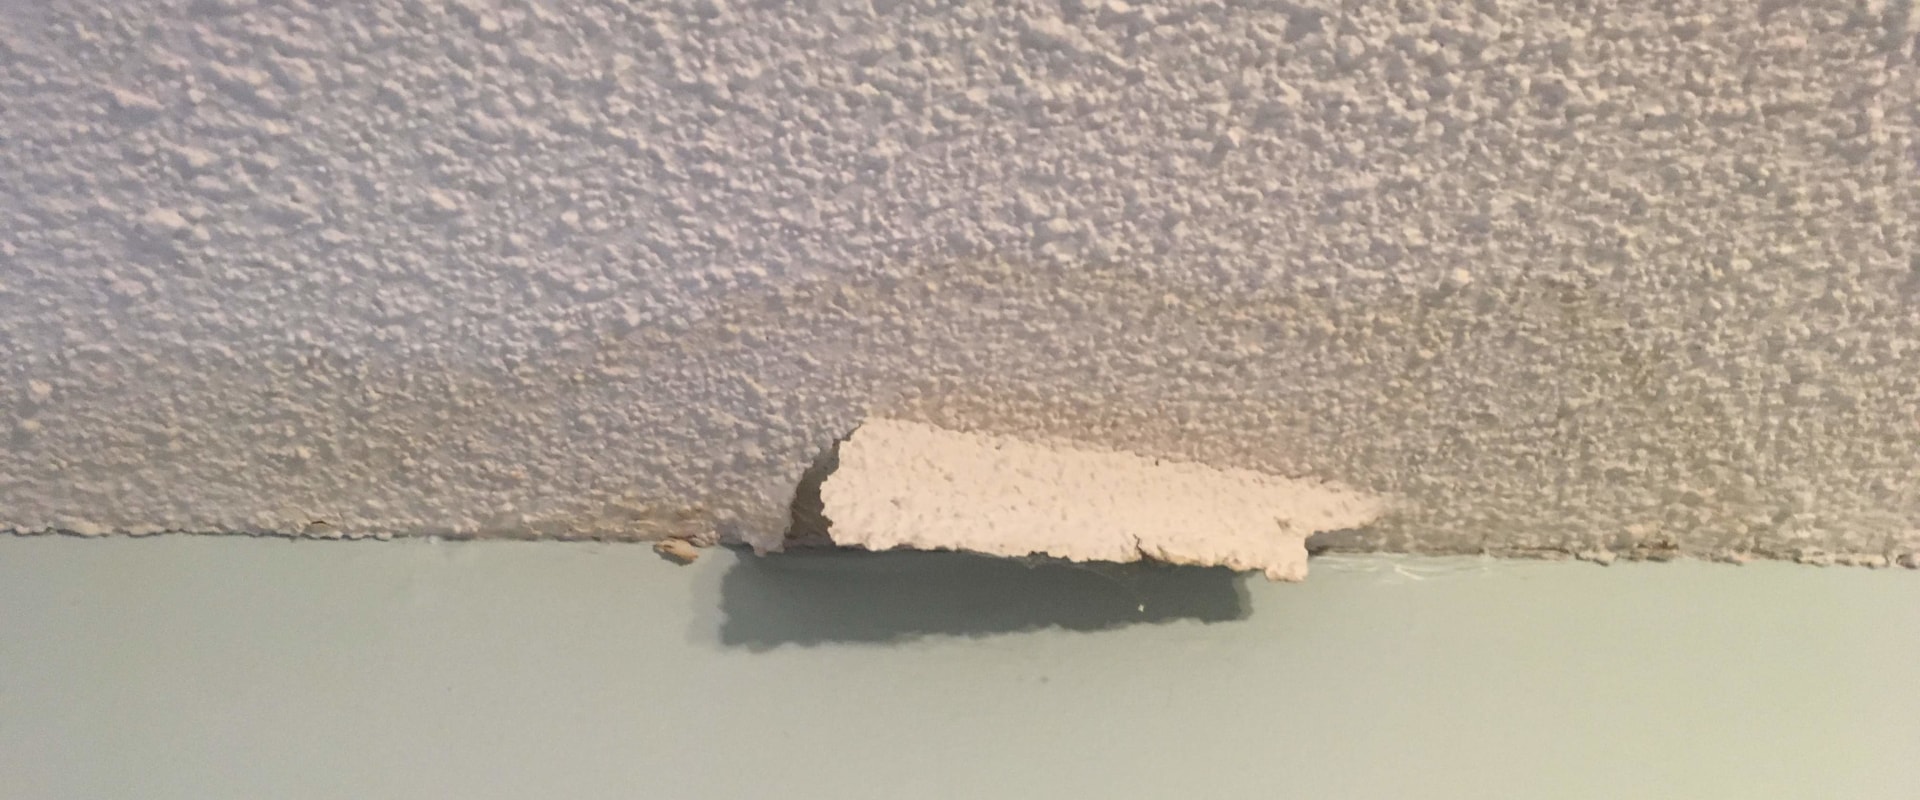 Should i be worried about water damage?